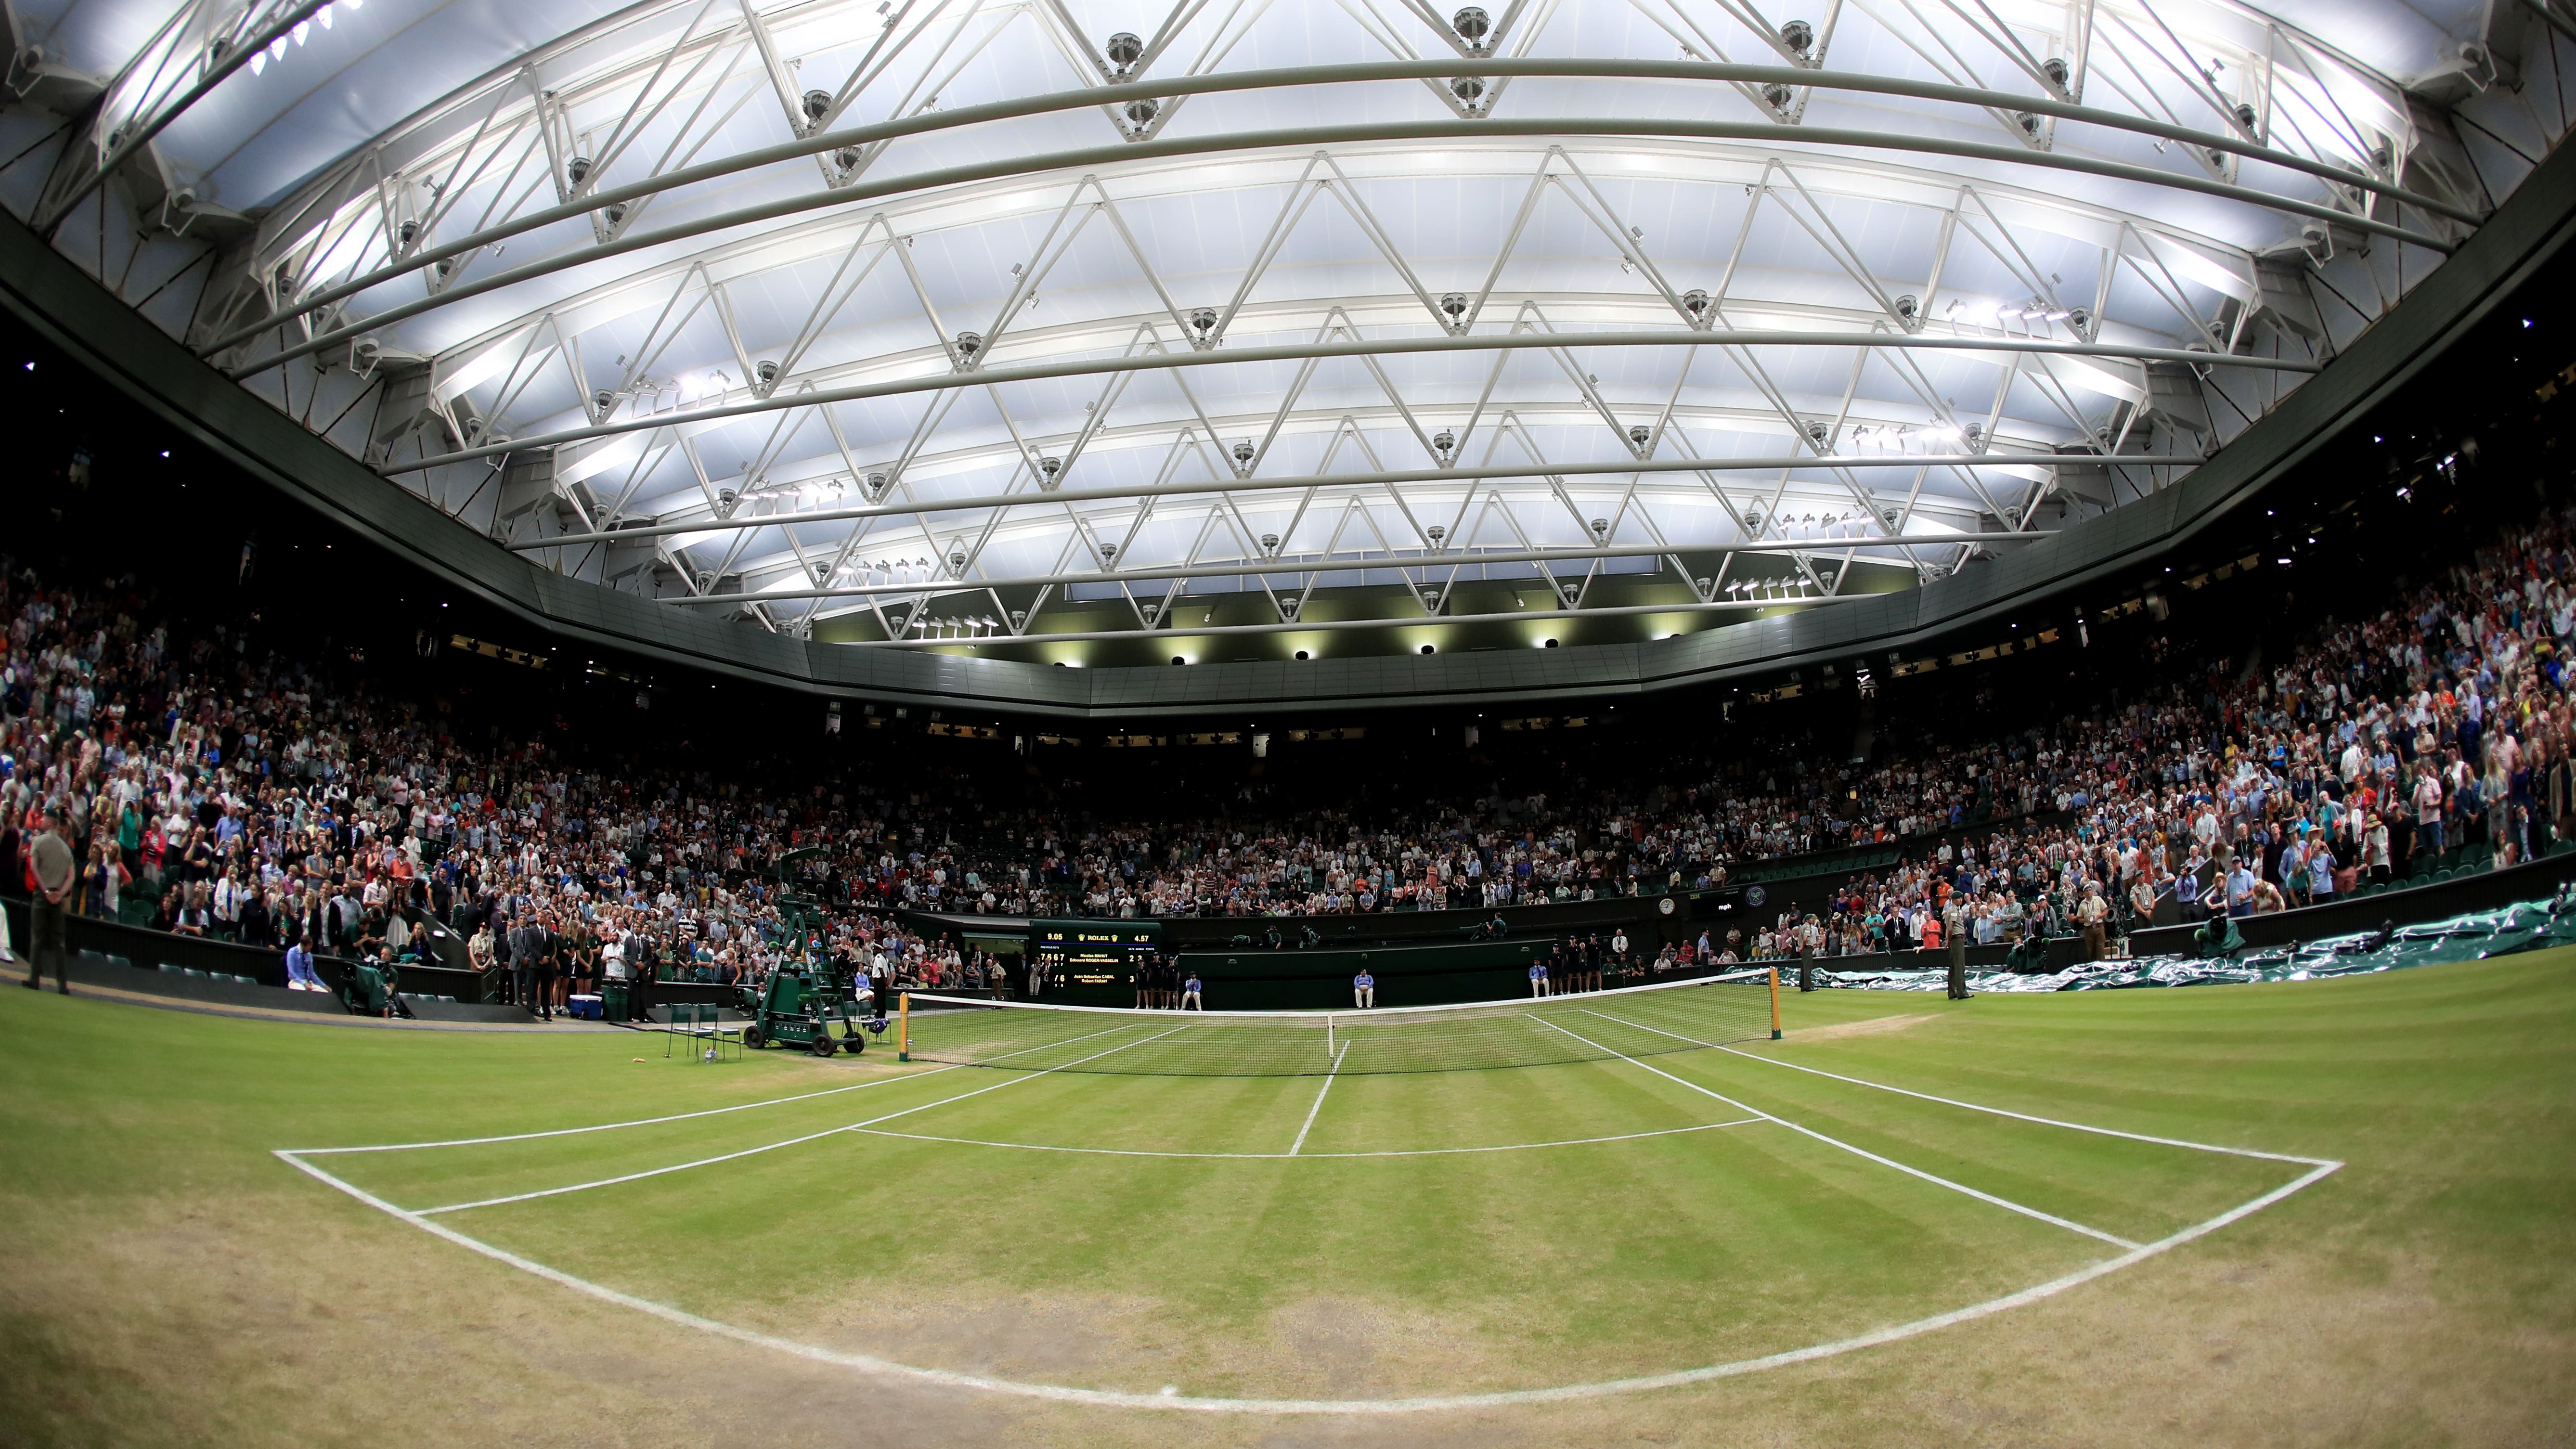 Full capacity for Wimbledon finals and 40,000 for Wembley’s last four